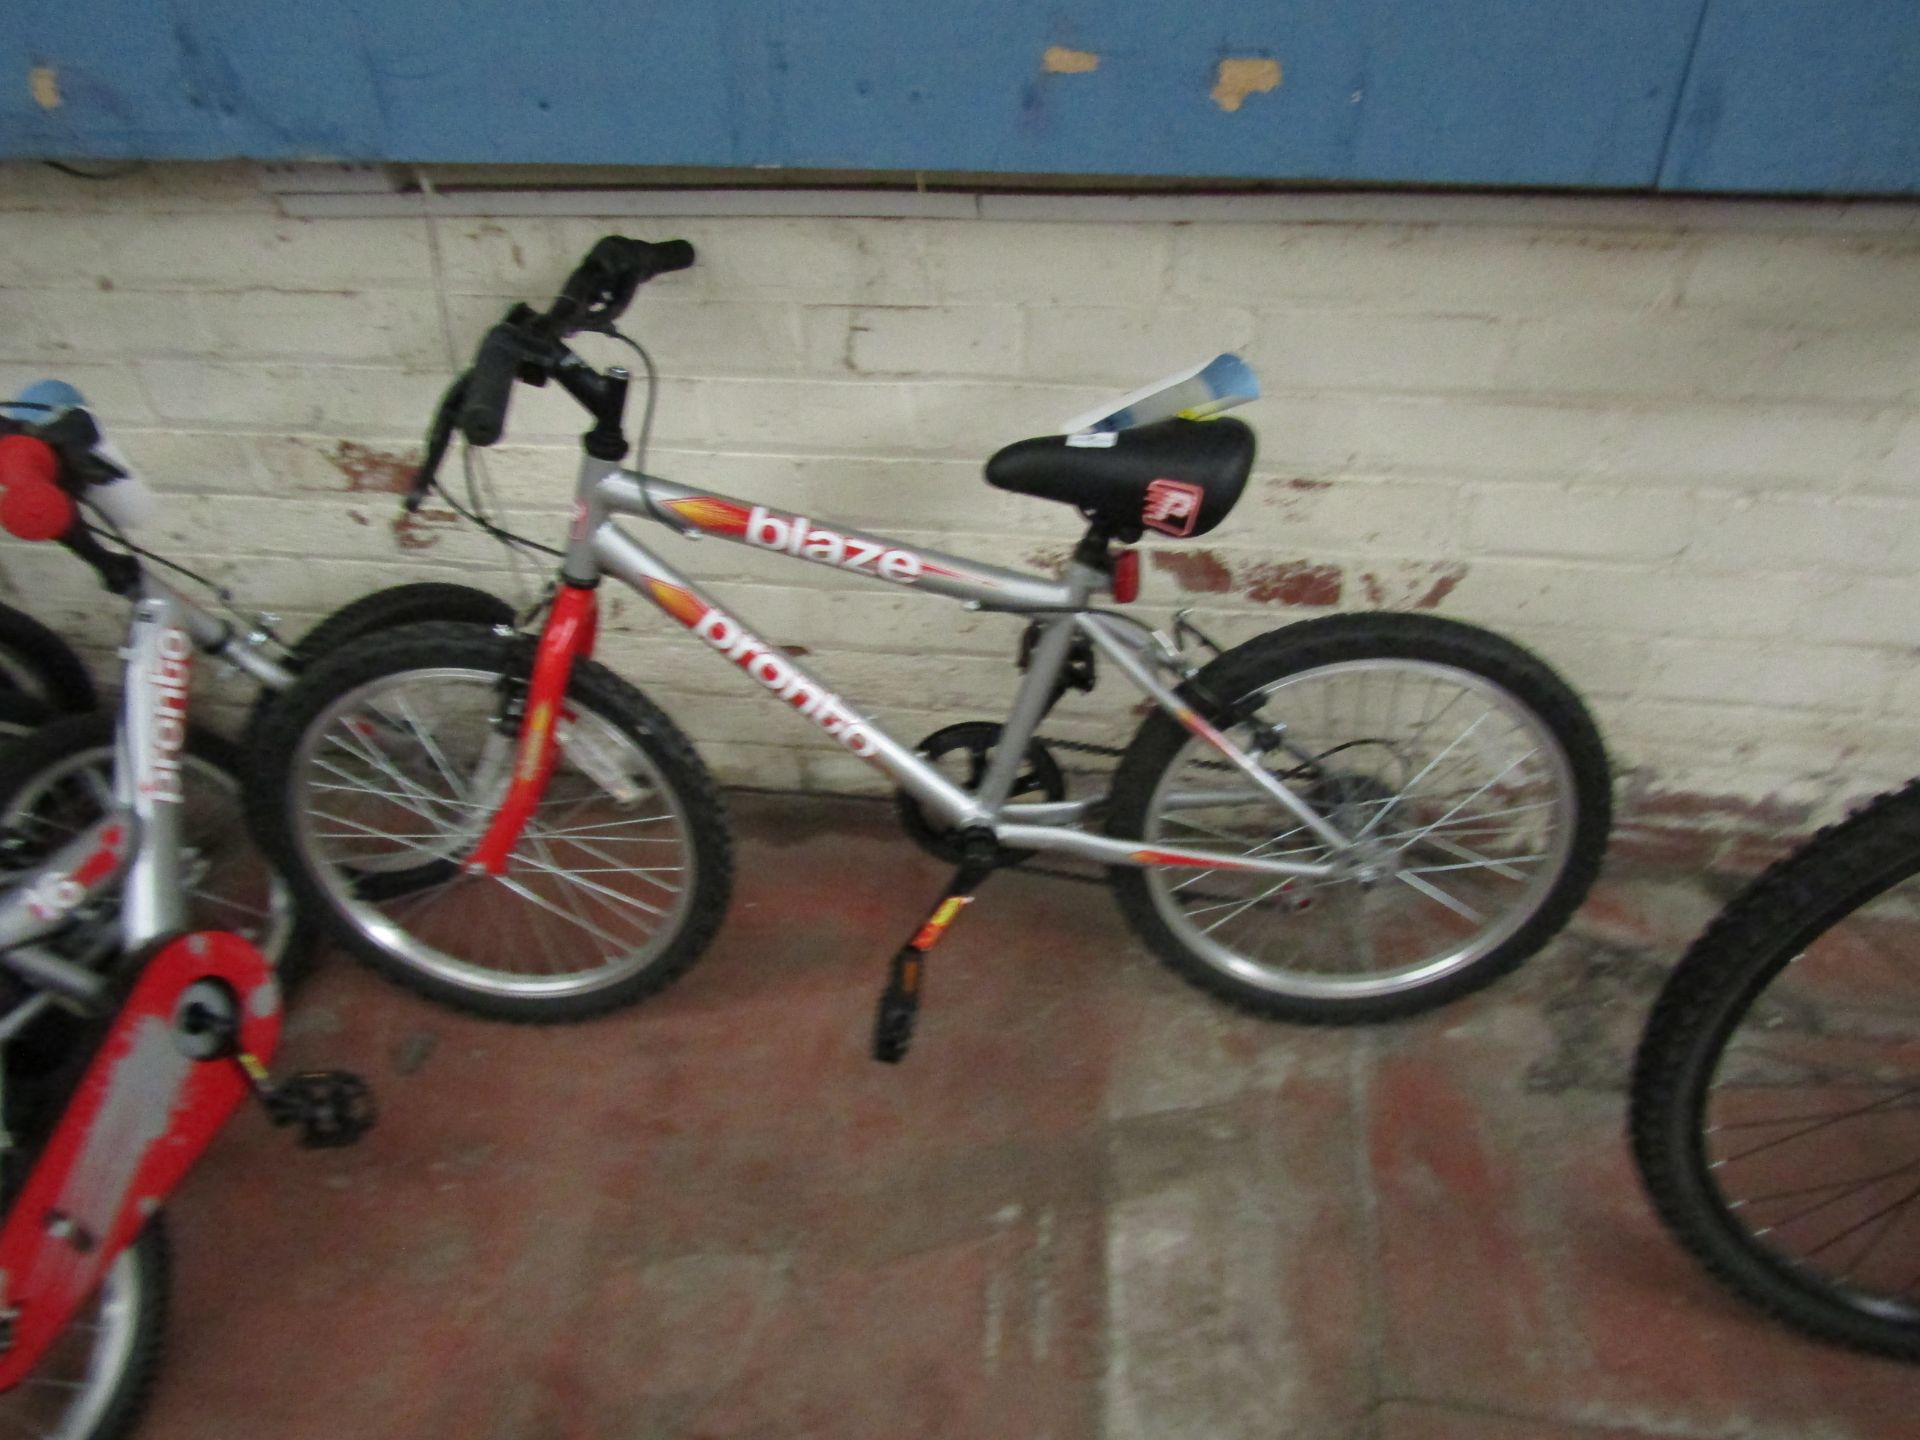 | 1X | PRONTO BLAZE 20 INCH CHILDREN BICYCLE | USED CONDITION UNCHECKED | NO ONLINE RESALE | SKU - |